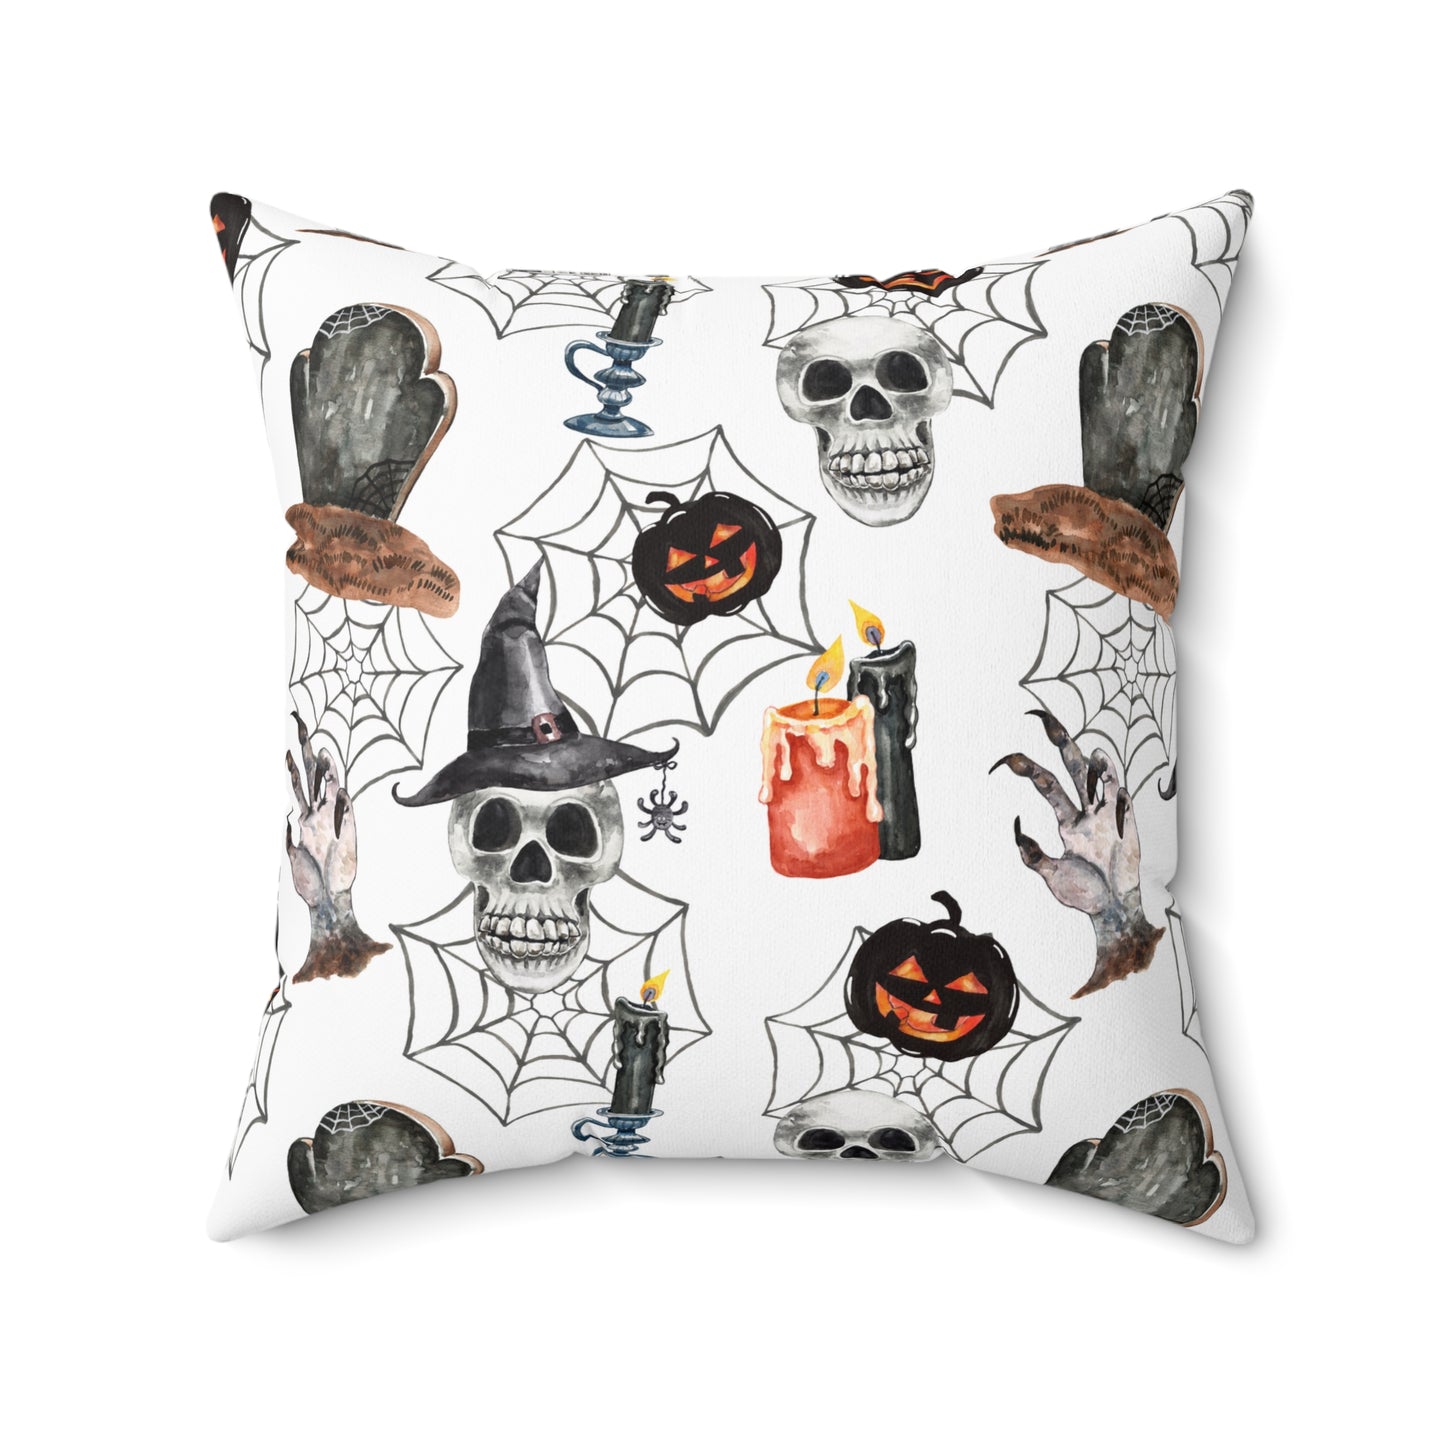 Skulls and Pumpkins Spun Polyester Square Pillow with Insert